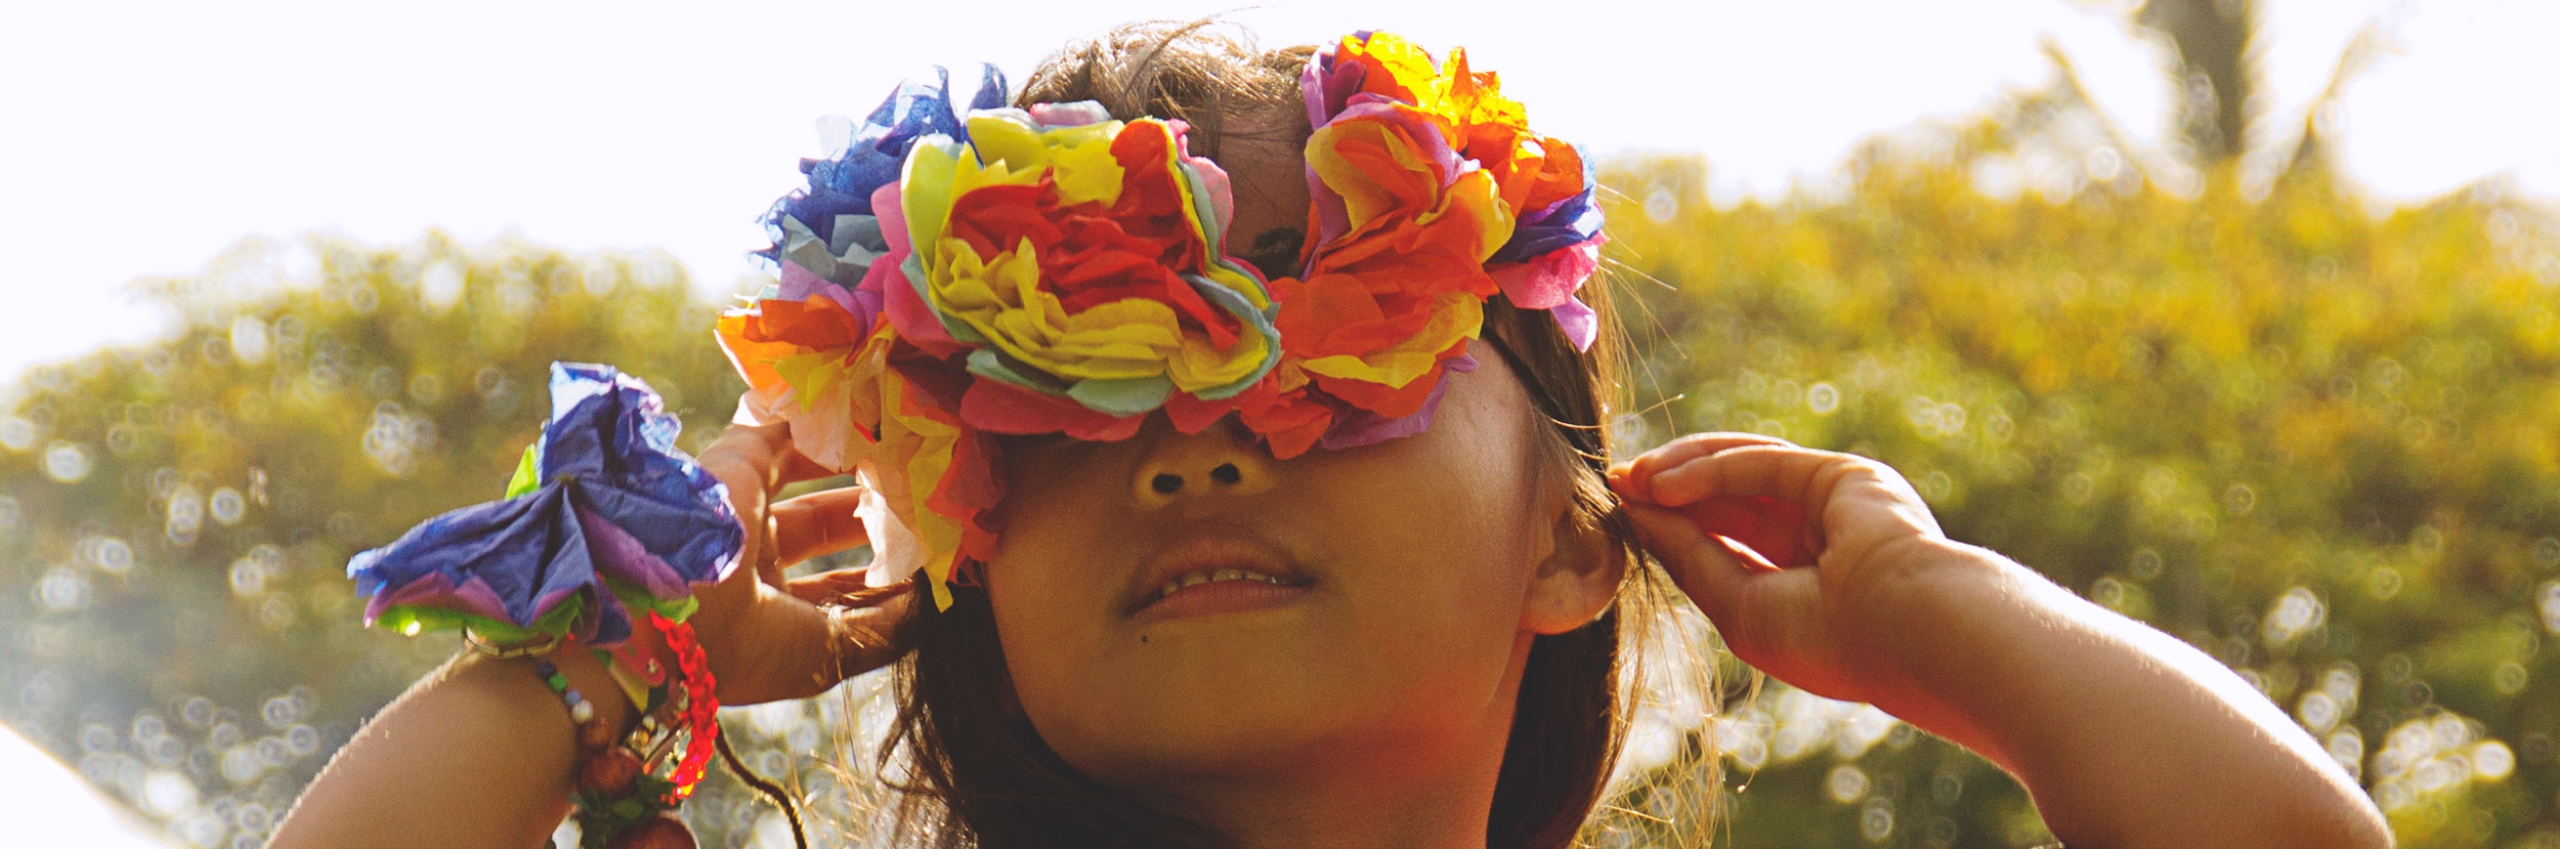 A young girl looks up at the sky and wears fresh flowers on her wrist and head.